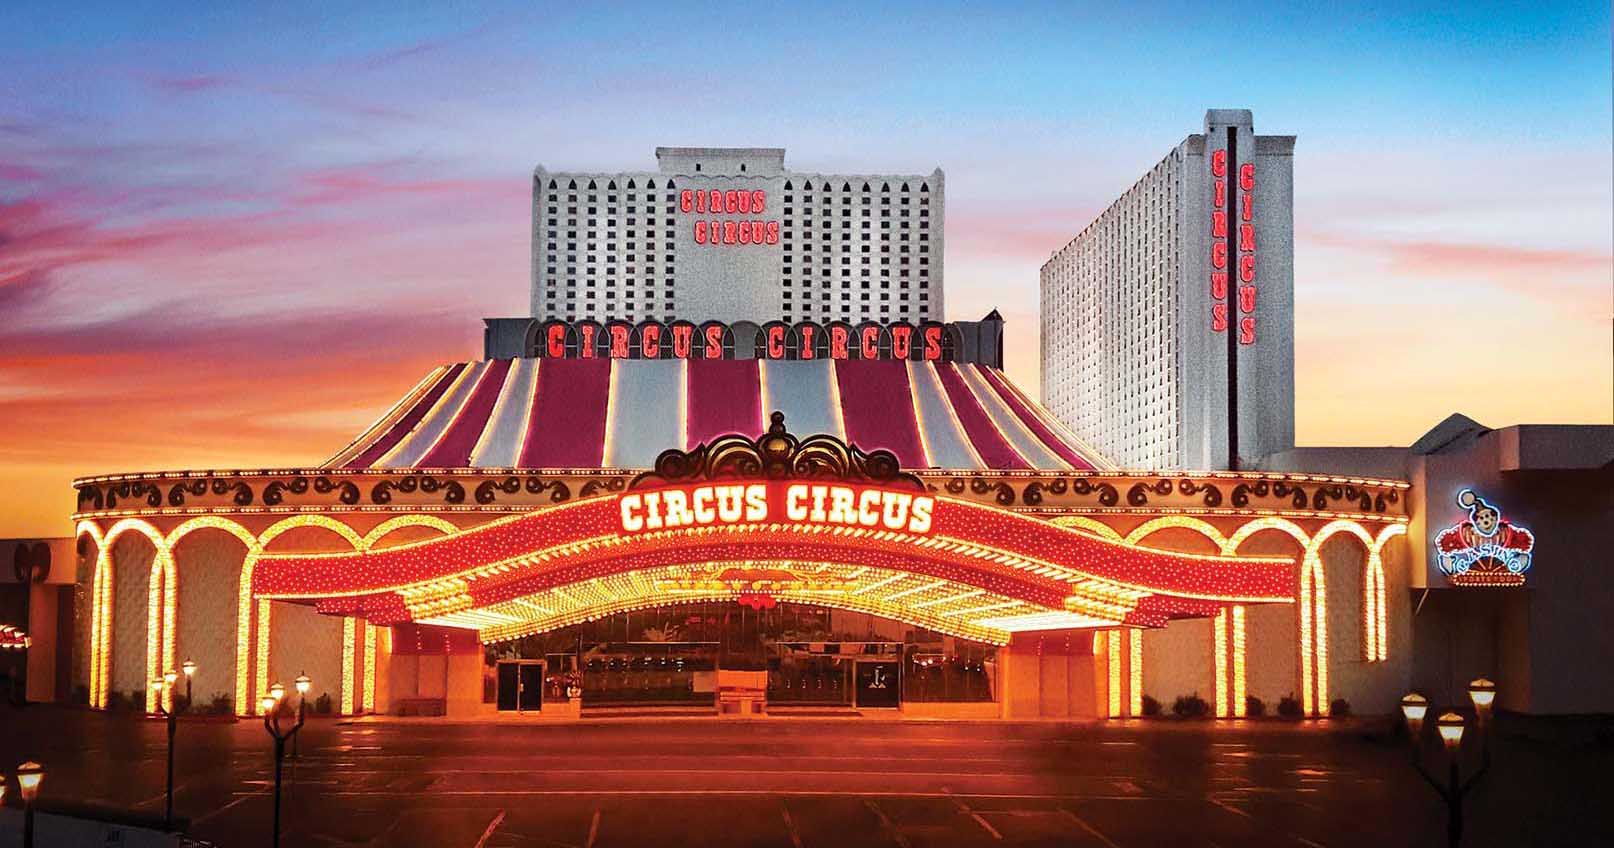 Circus Circus Las Vegas Hotels - a long-established casino but an acquired taste?